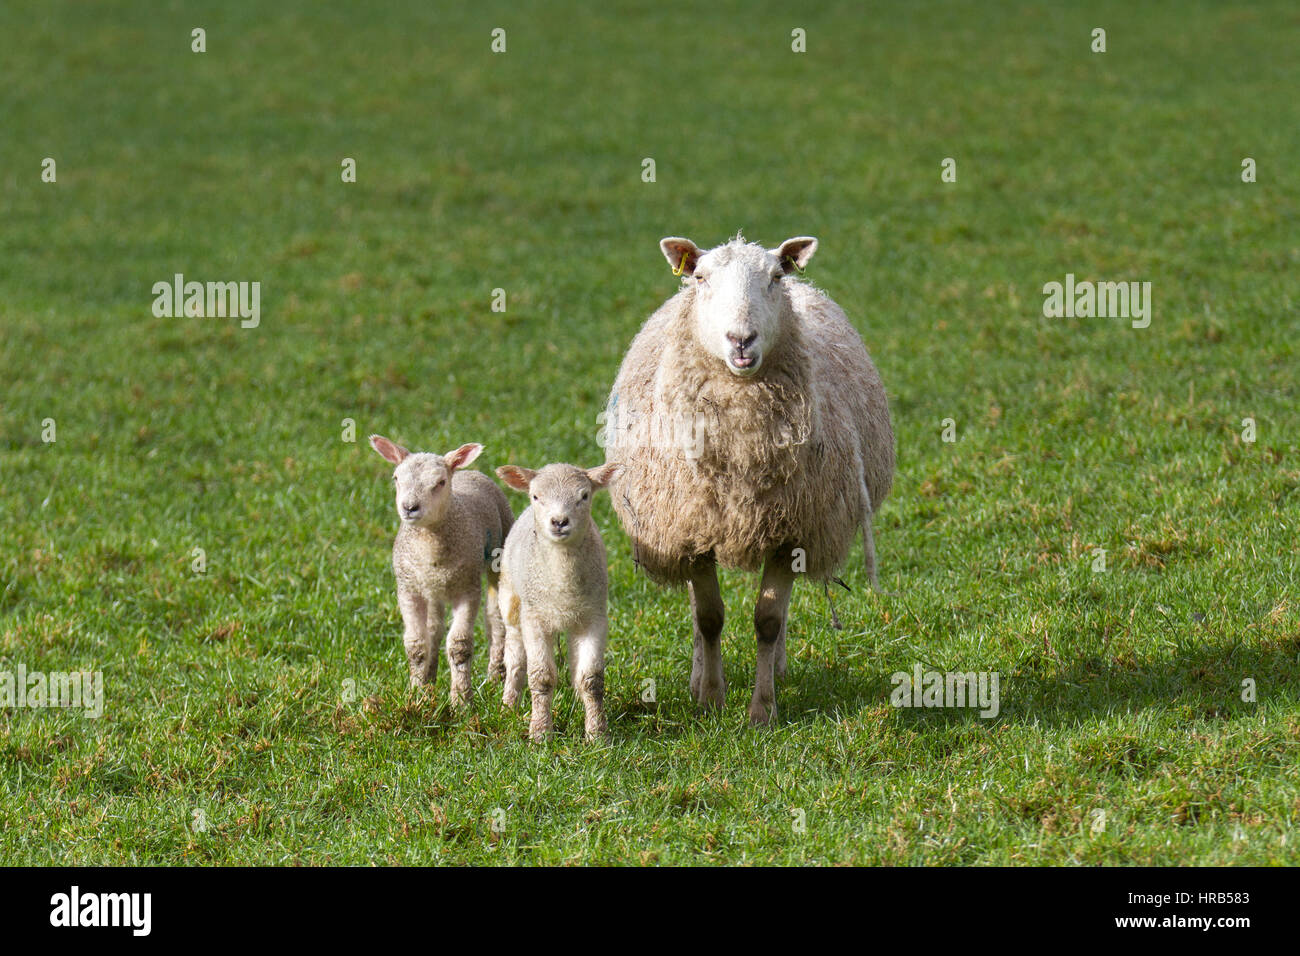 Burscough, Lancashire, UK. 1st Mar, 2017. UK Weather. New-born lambs in pasture on the 1st day of Spring. Dorset ewe with twin lambs at the Windmill Animal Farm. Dorset Sheep are the only sheep breed that can breed all year around - ideal for controlling lambing times to coincide with school holidays and half terms. Credit: MediaWorldImages/AlamyLiveNews Stock Photo